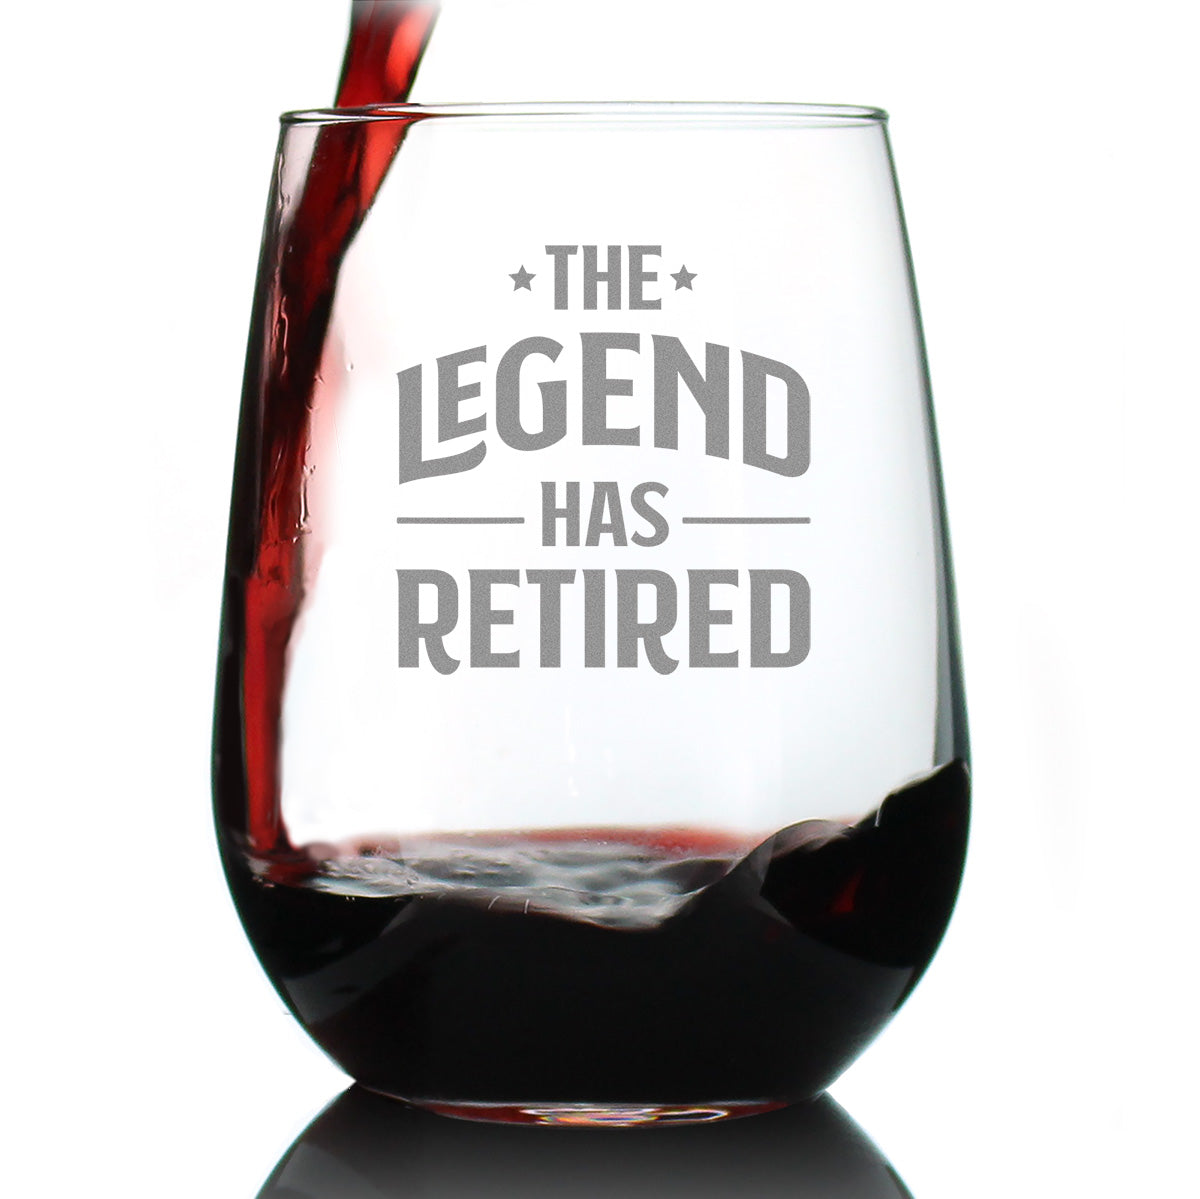 The Legend Has Retired - Stemless Wine Glass - Funny Retirement Gifts for Boss or Coworkers - Large 17 Ounce Size